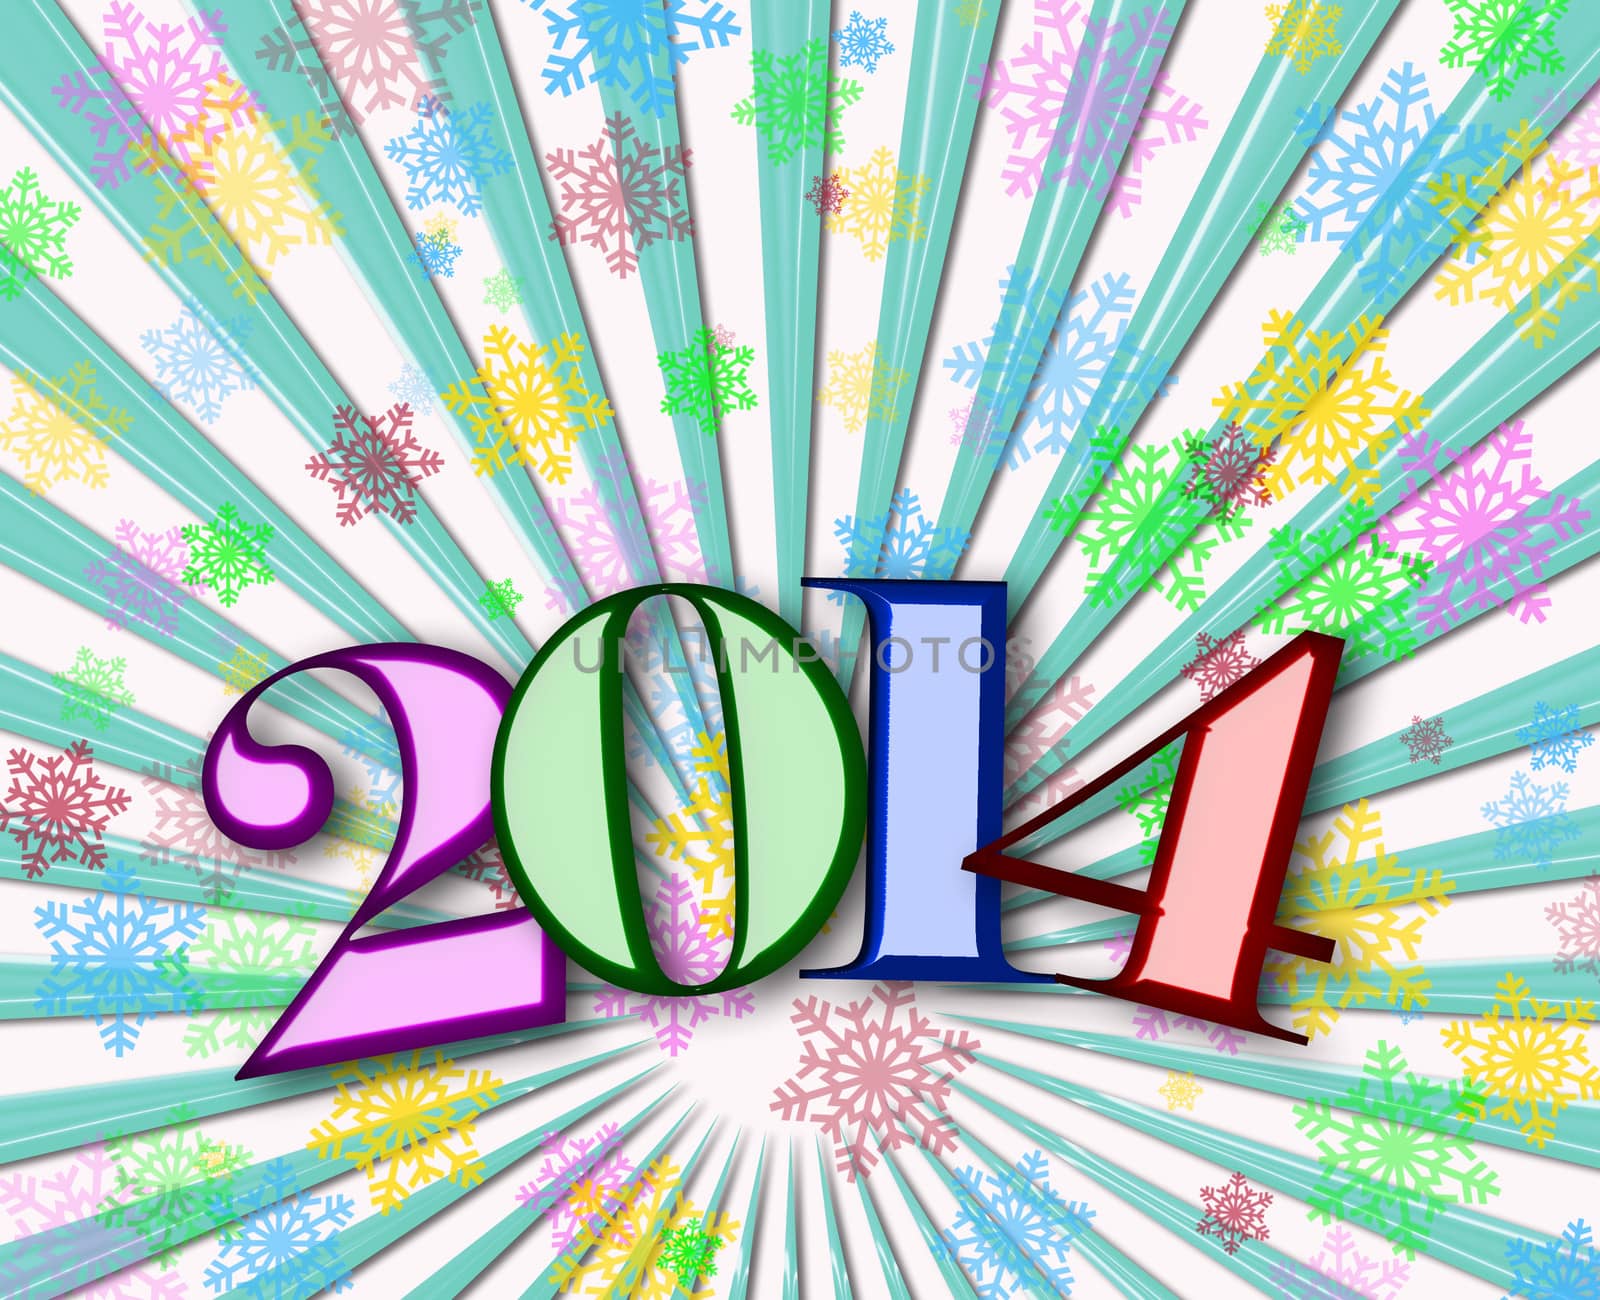 Happy New Year 2014 background with colorful snowflakes by Dddaca